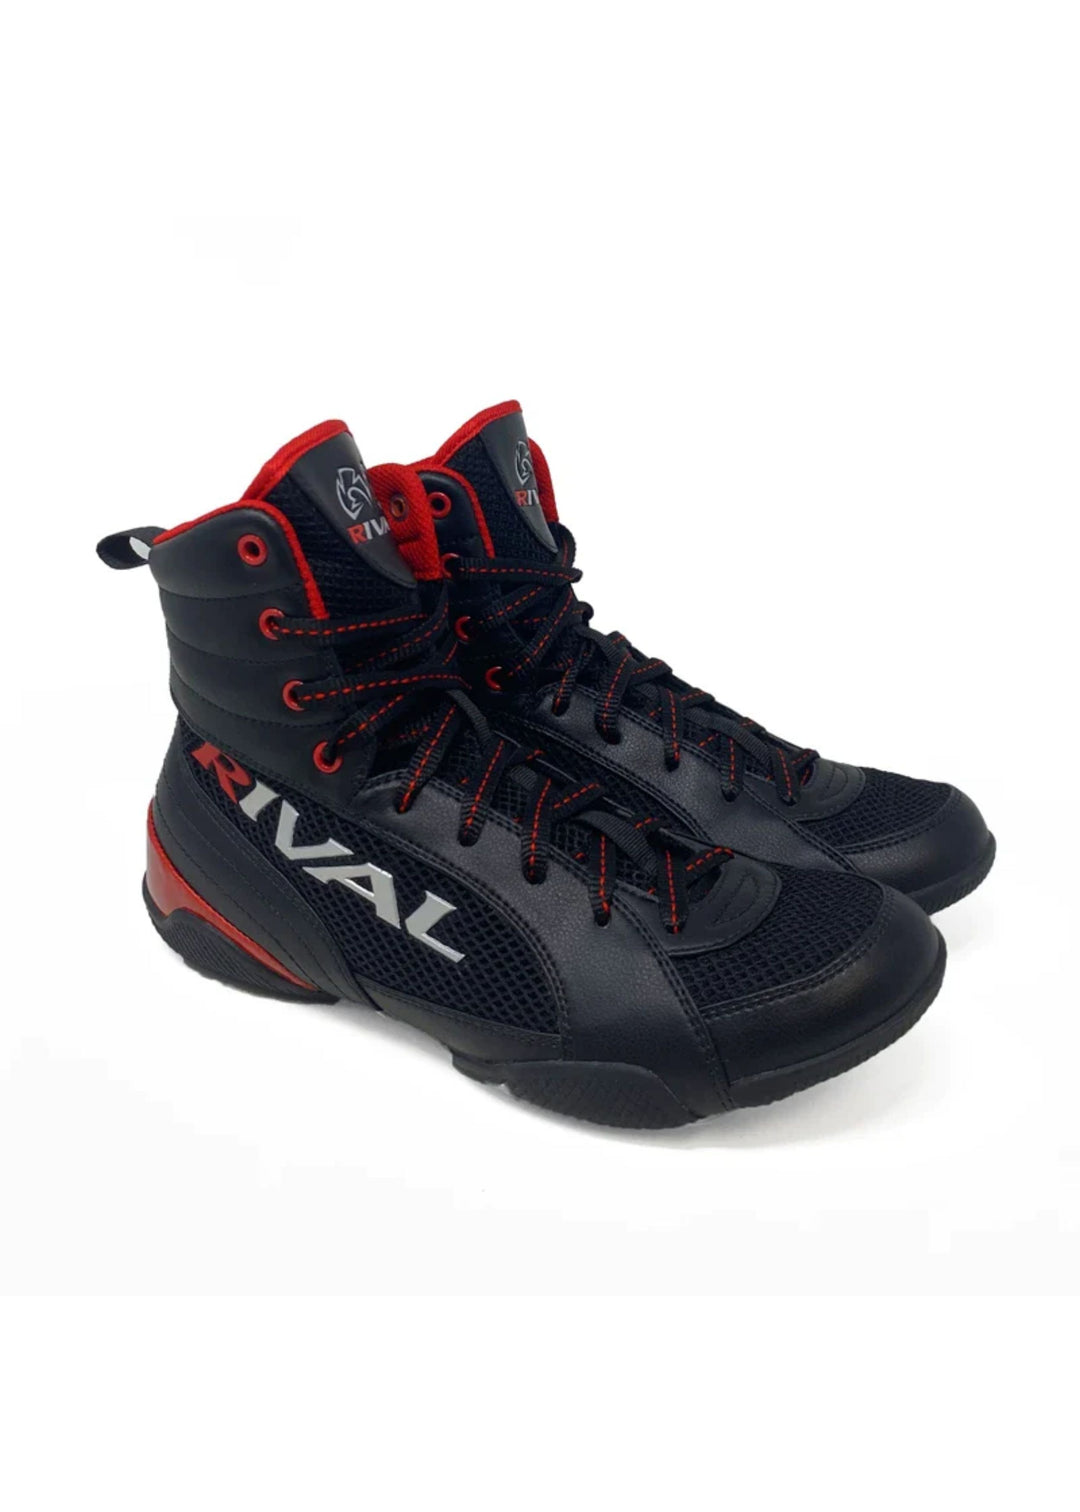 RIVAL RSX-GUERRERO DELUXE BOXING BOOTS - Black/Red